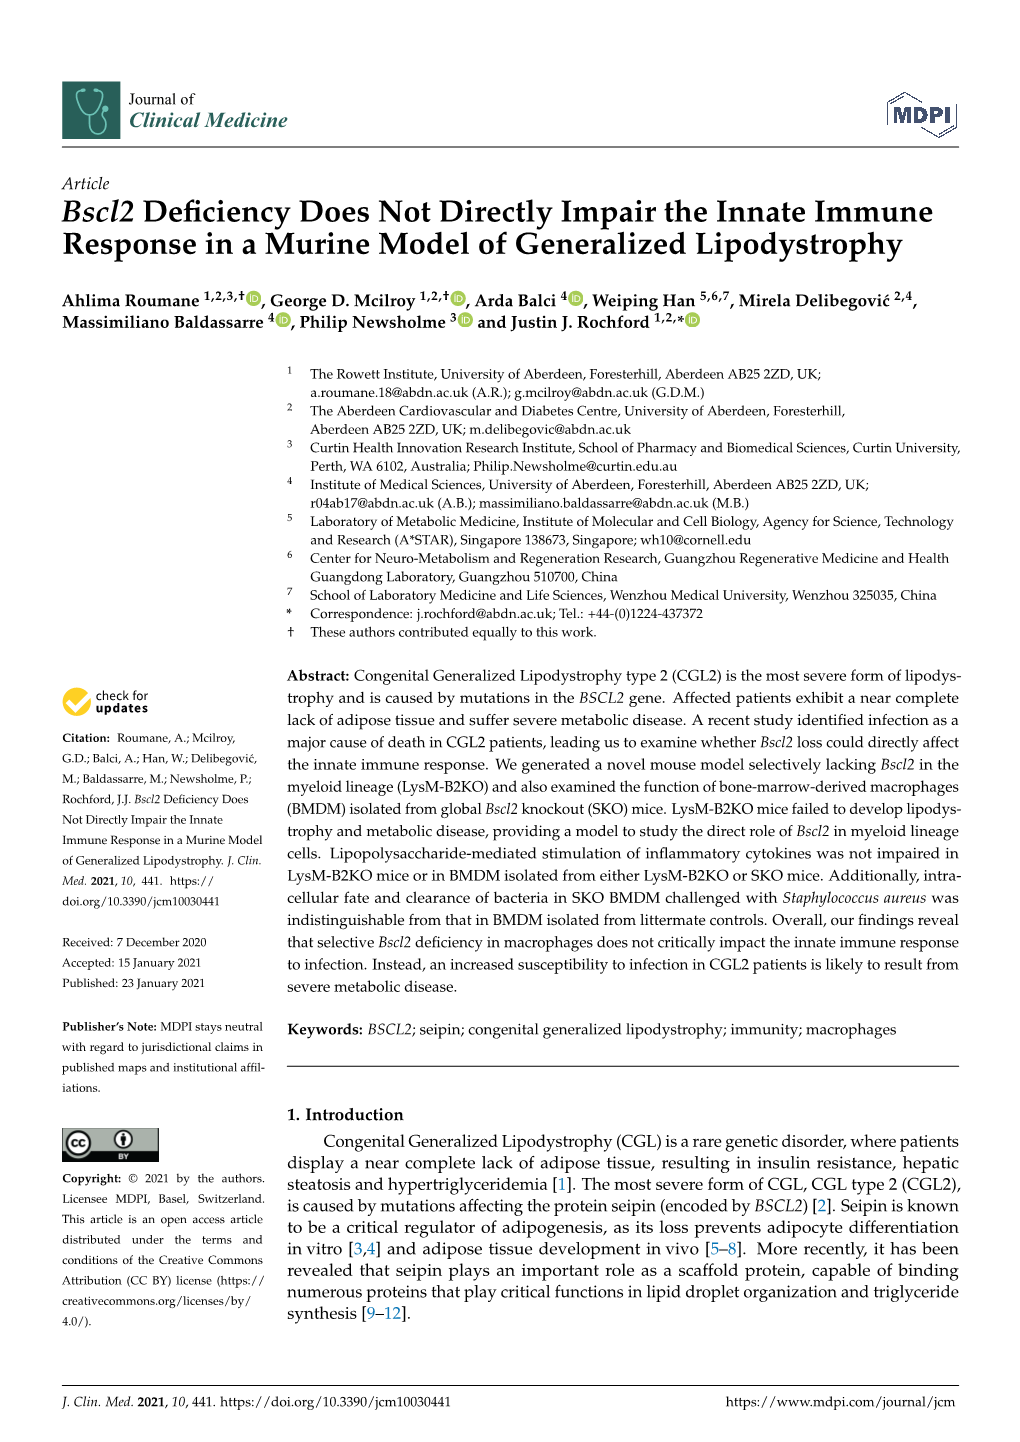 Bscl2 Deficiency Does Not Directly Impair the Innate Immune Response in a Murine Model of Generalized Lipodystrophy